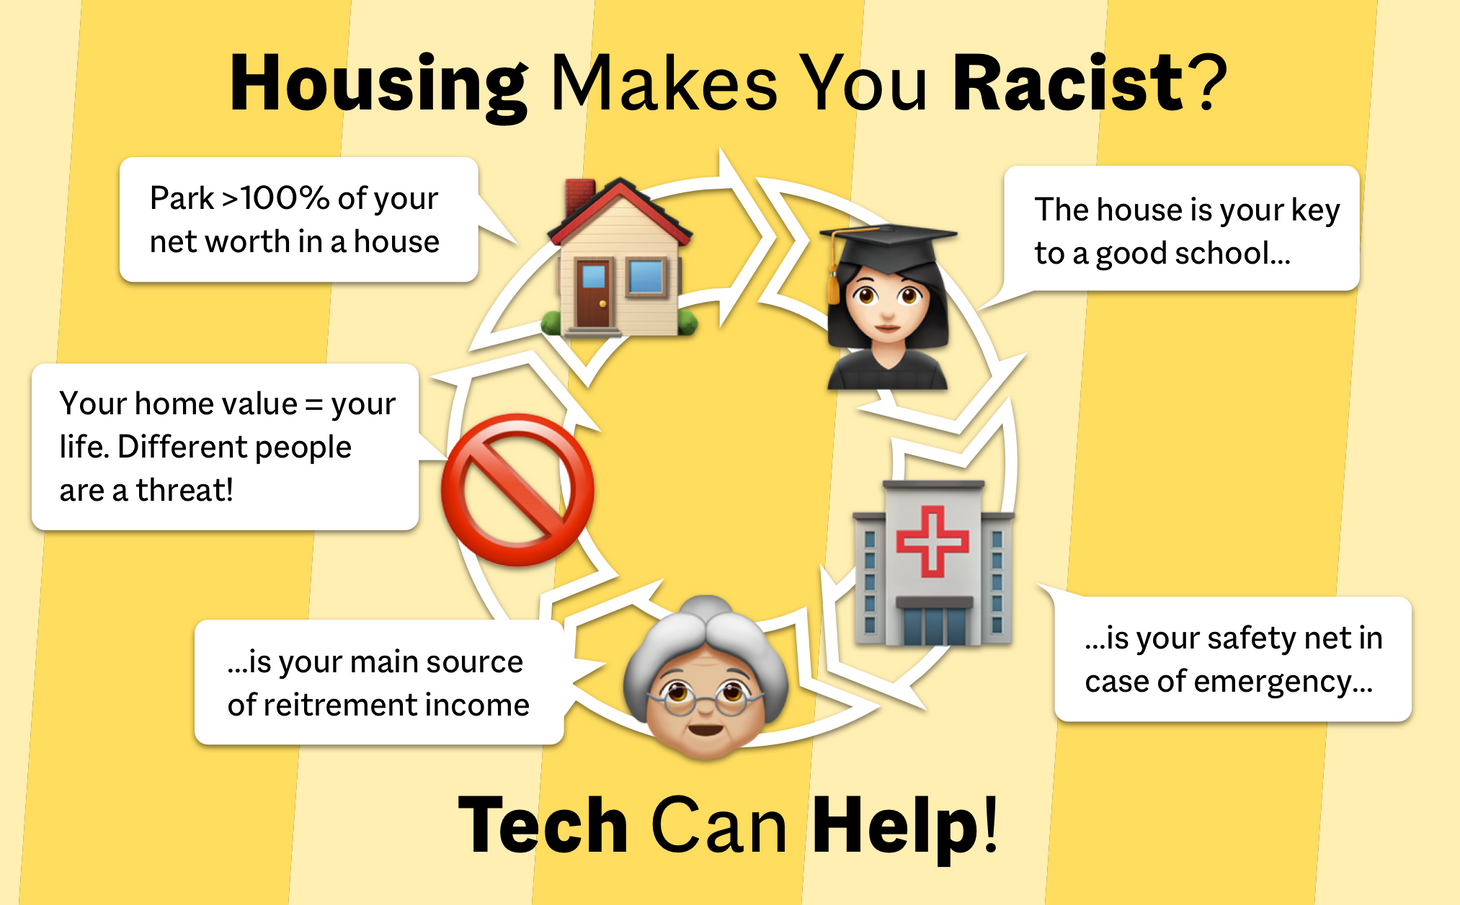 Housing makes you racist. Tech can help.